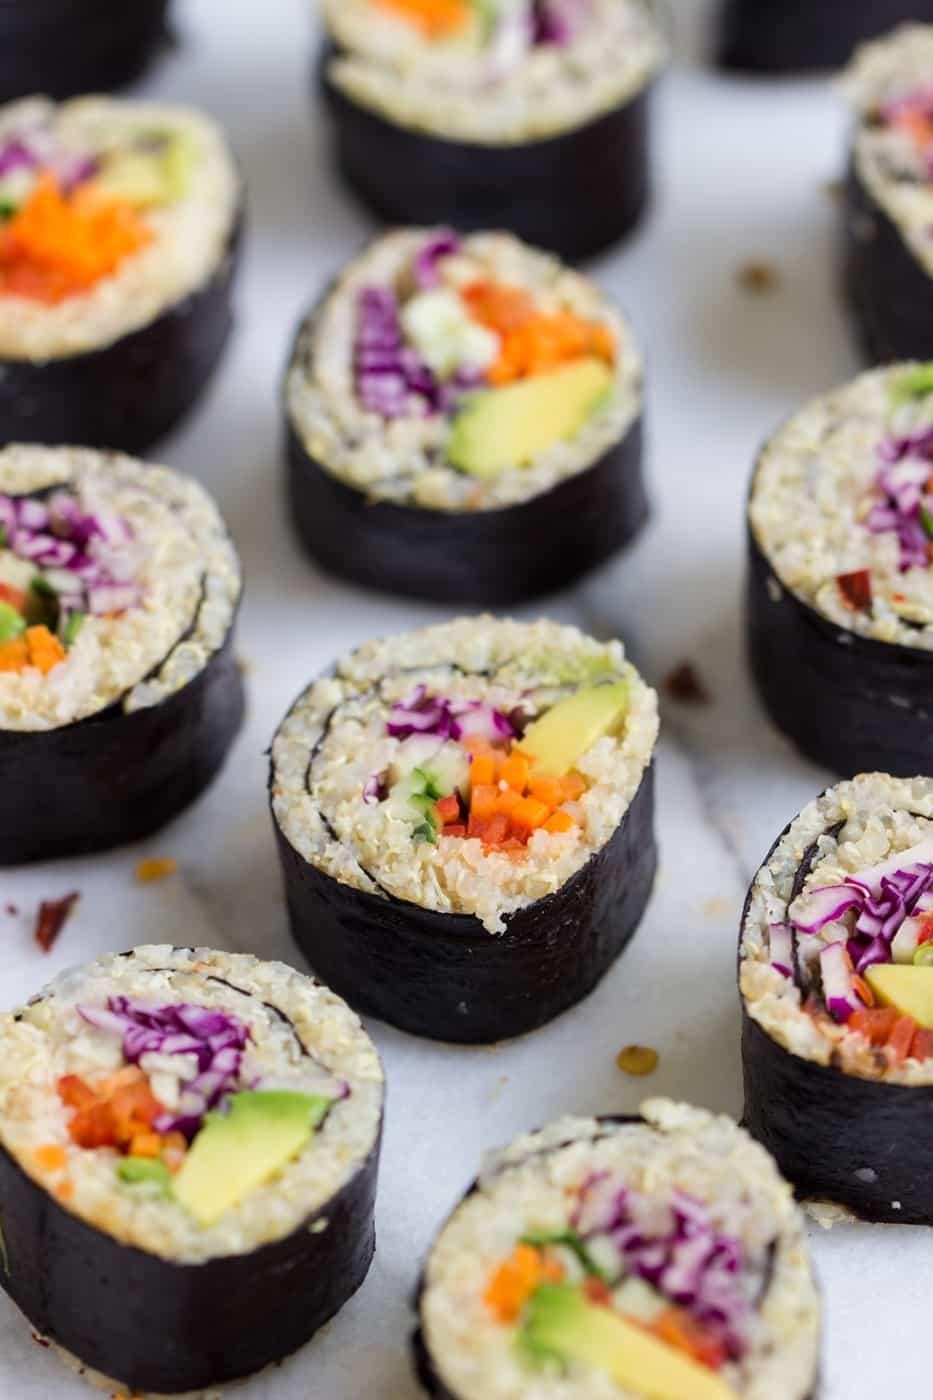 SUSHI 101 (HANDS-ON!)